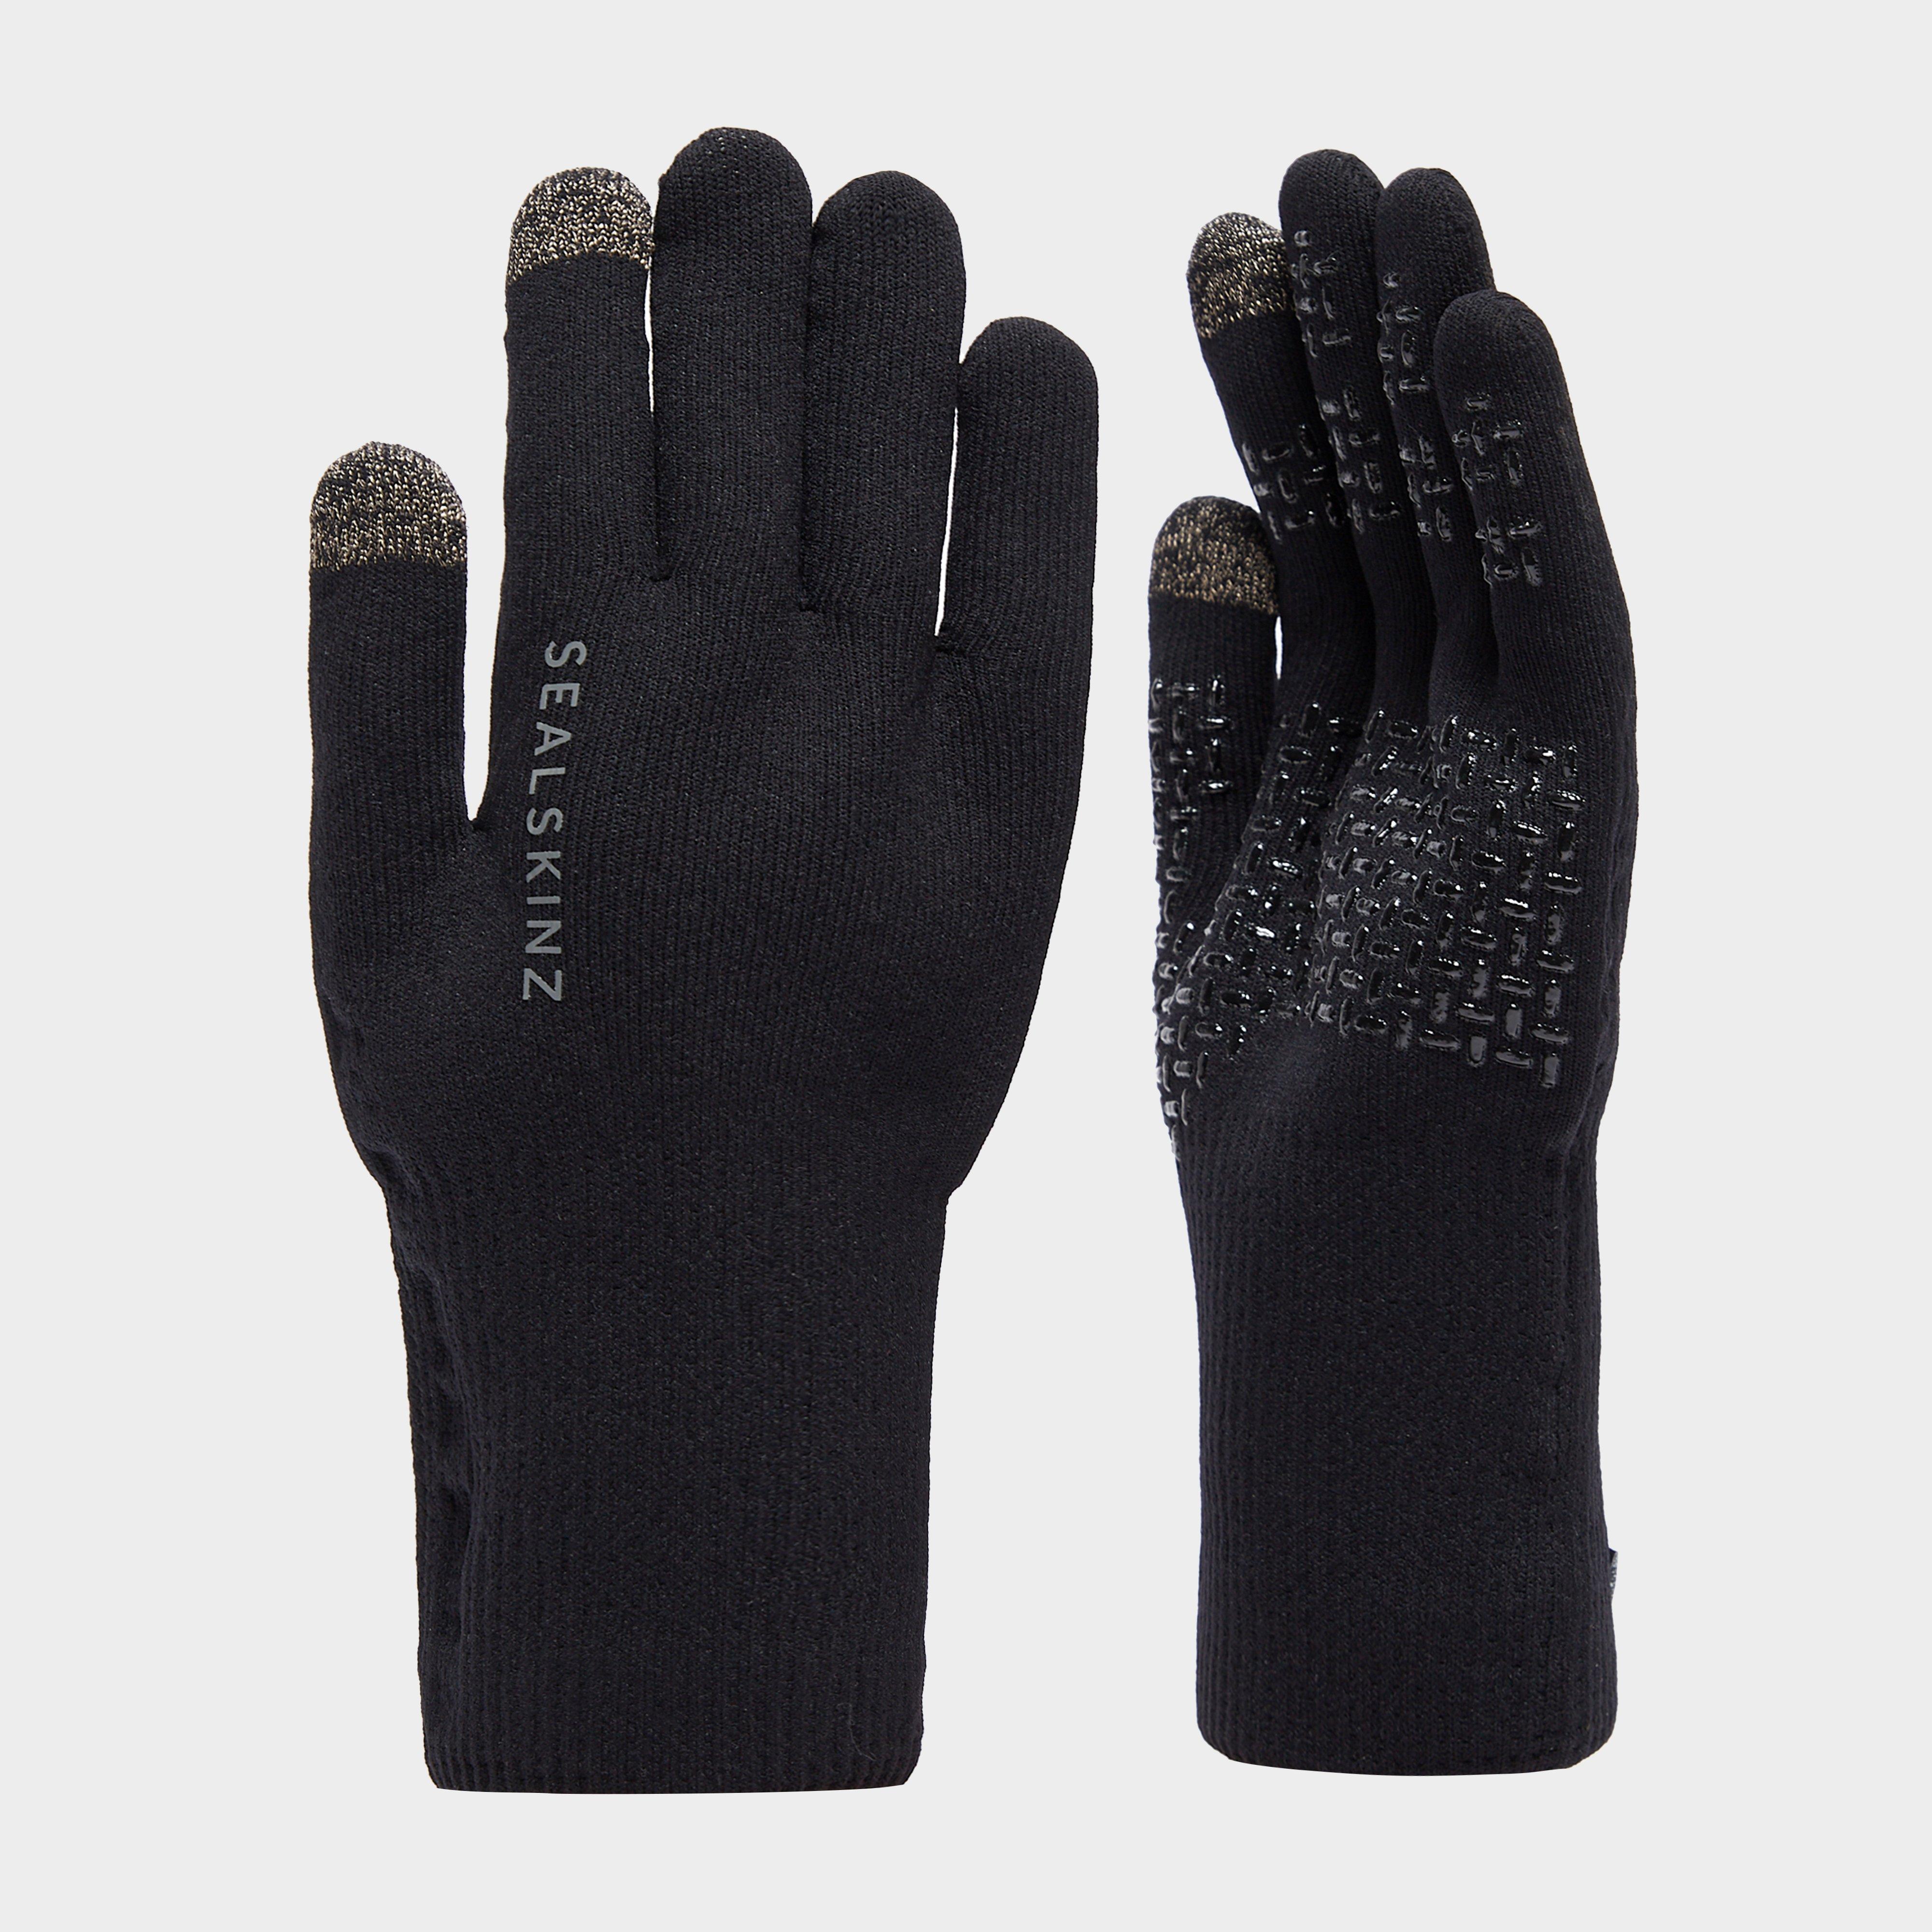 Photos - Cycling Gloves Waterproof All Weather Ultra Grip Glove, Black 